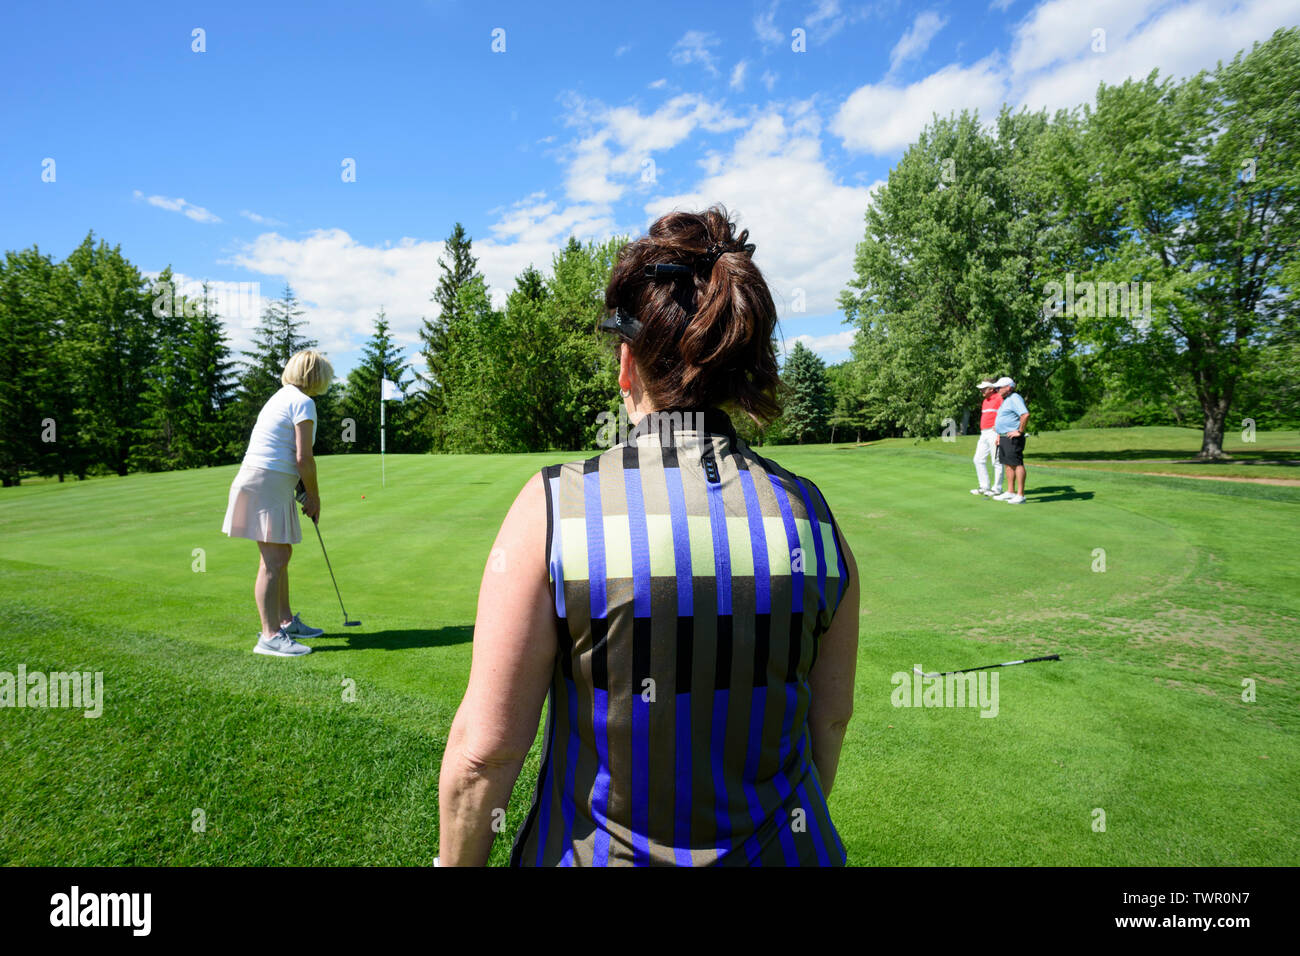 Golf foursome putting on a green. Stock Photo